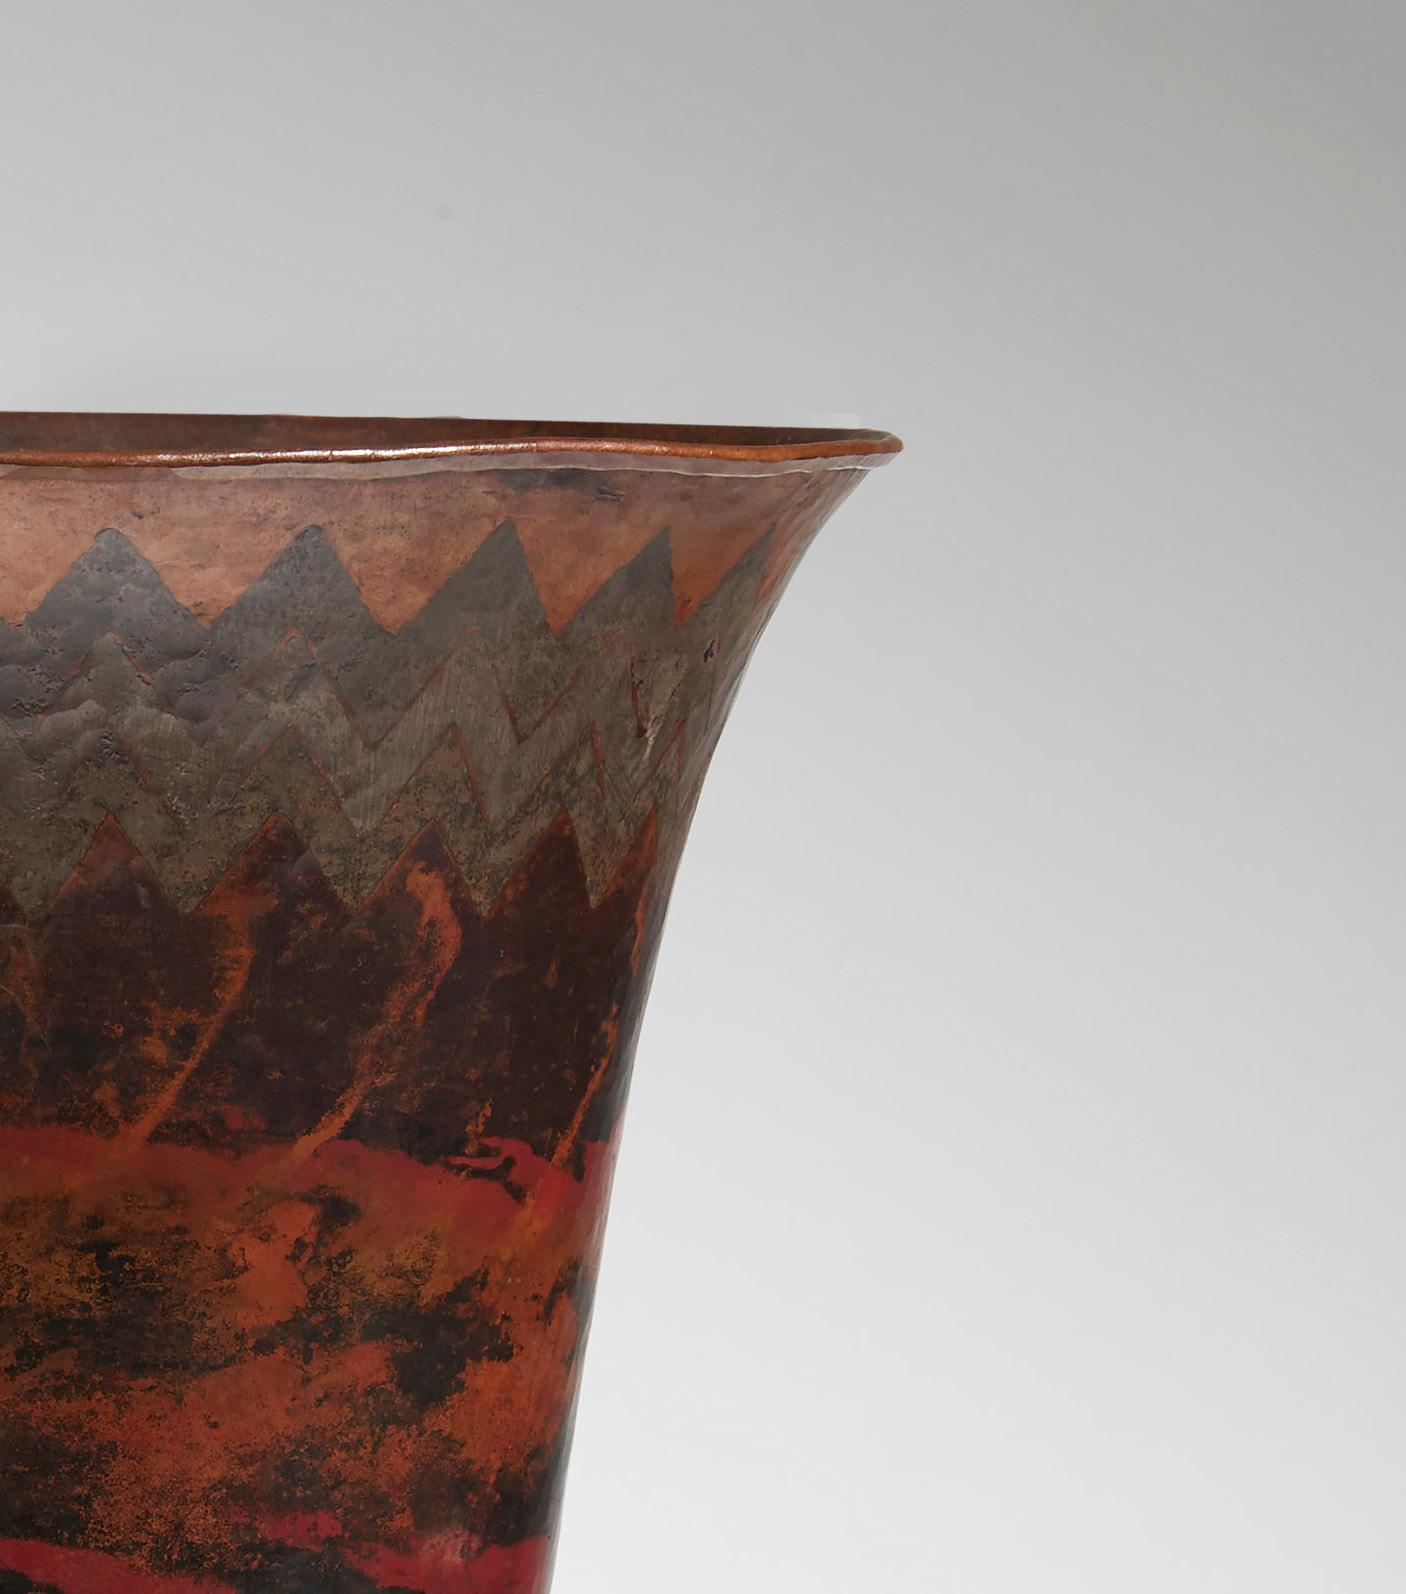 Cornet shaped vase on a truncated cone shape foot in copperware, with a zigzag frieze on the collar and red, orange, grey and black marblings on the belly
Signed 